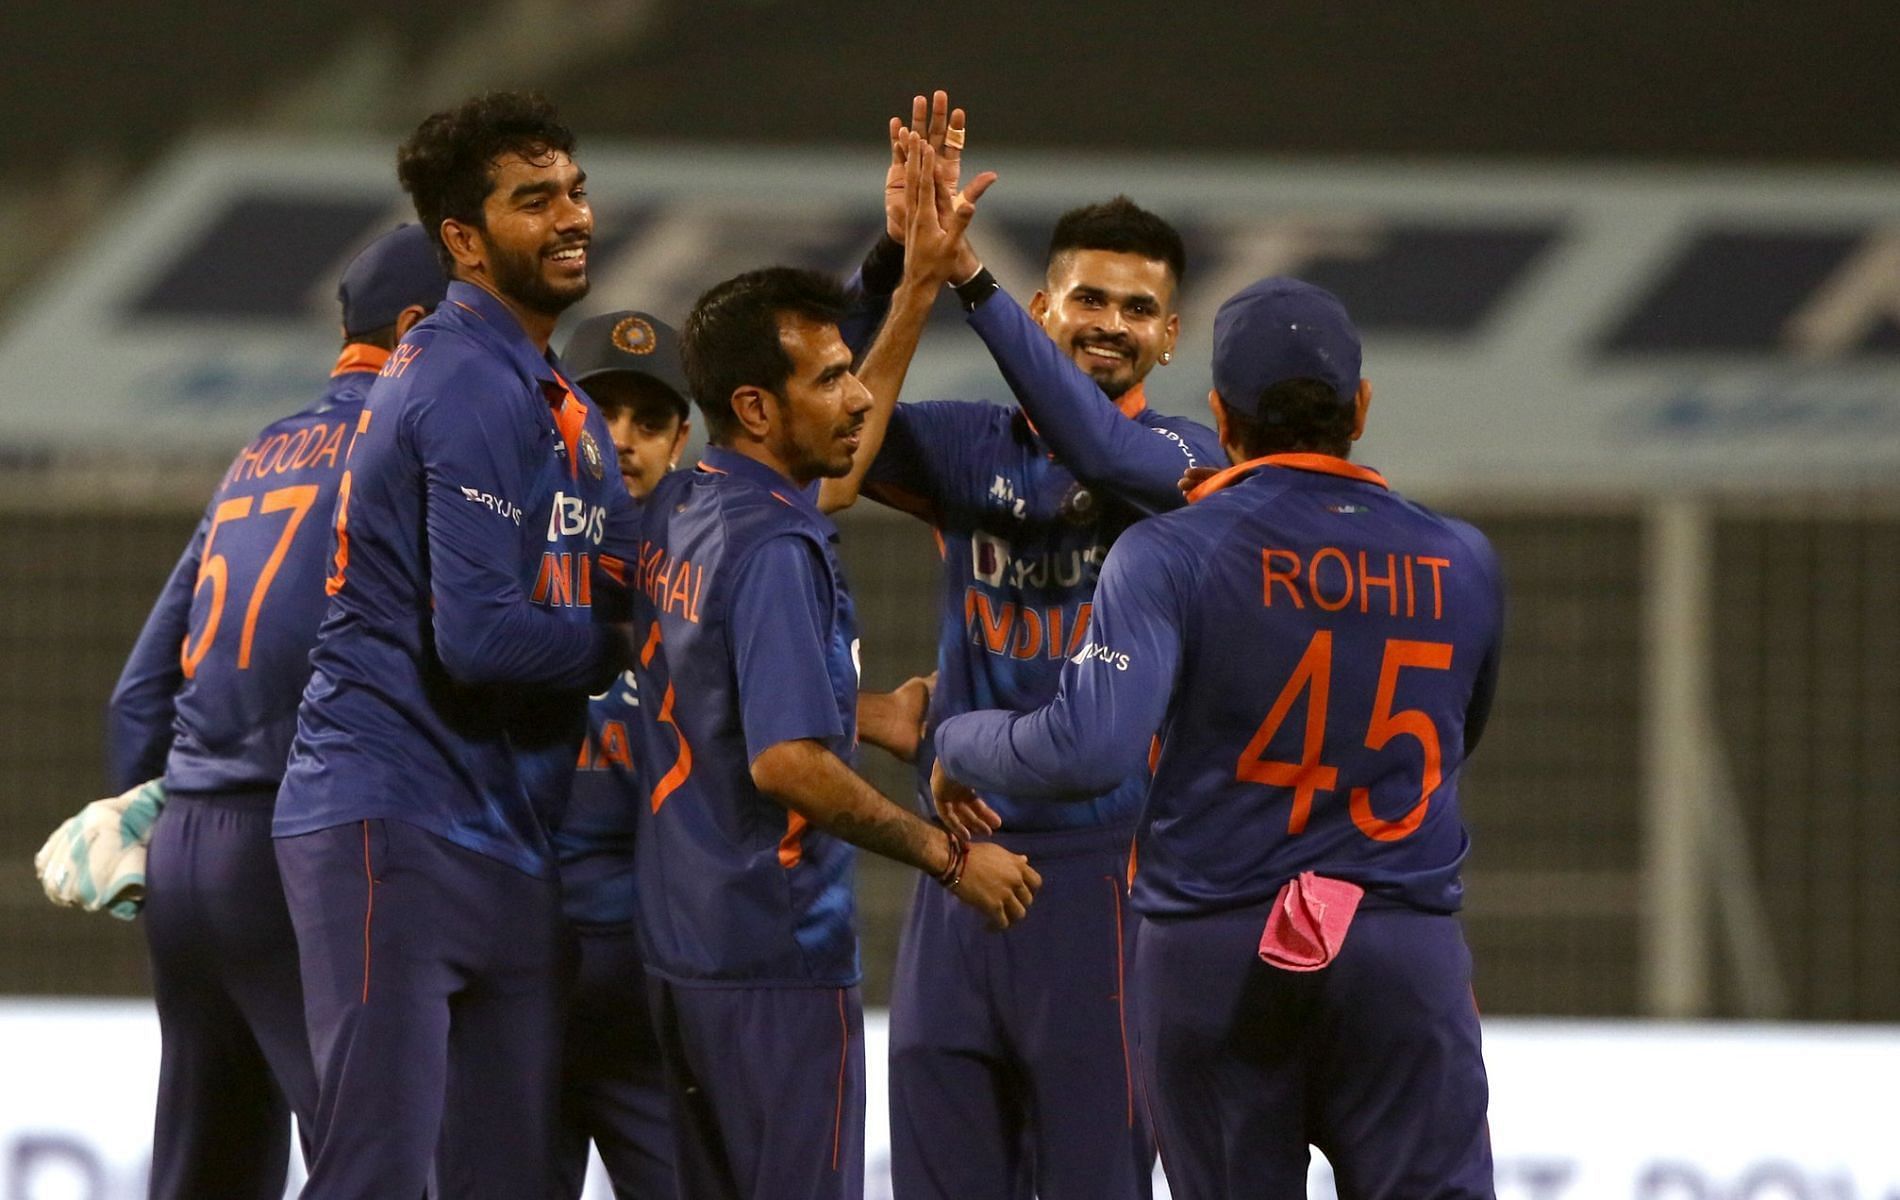 The Men in Blue won the T20I series against West Indies.